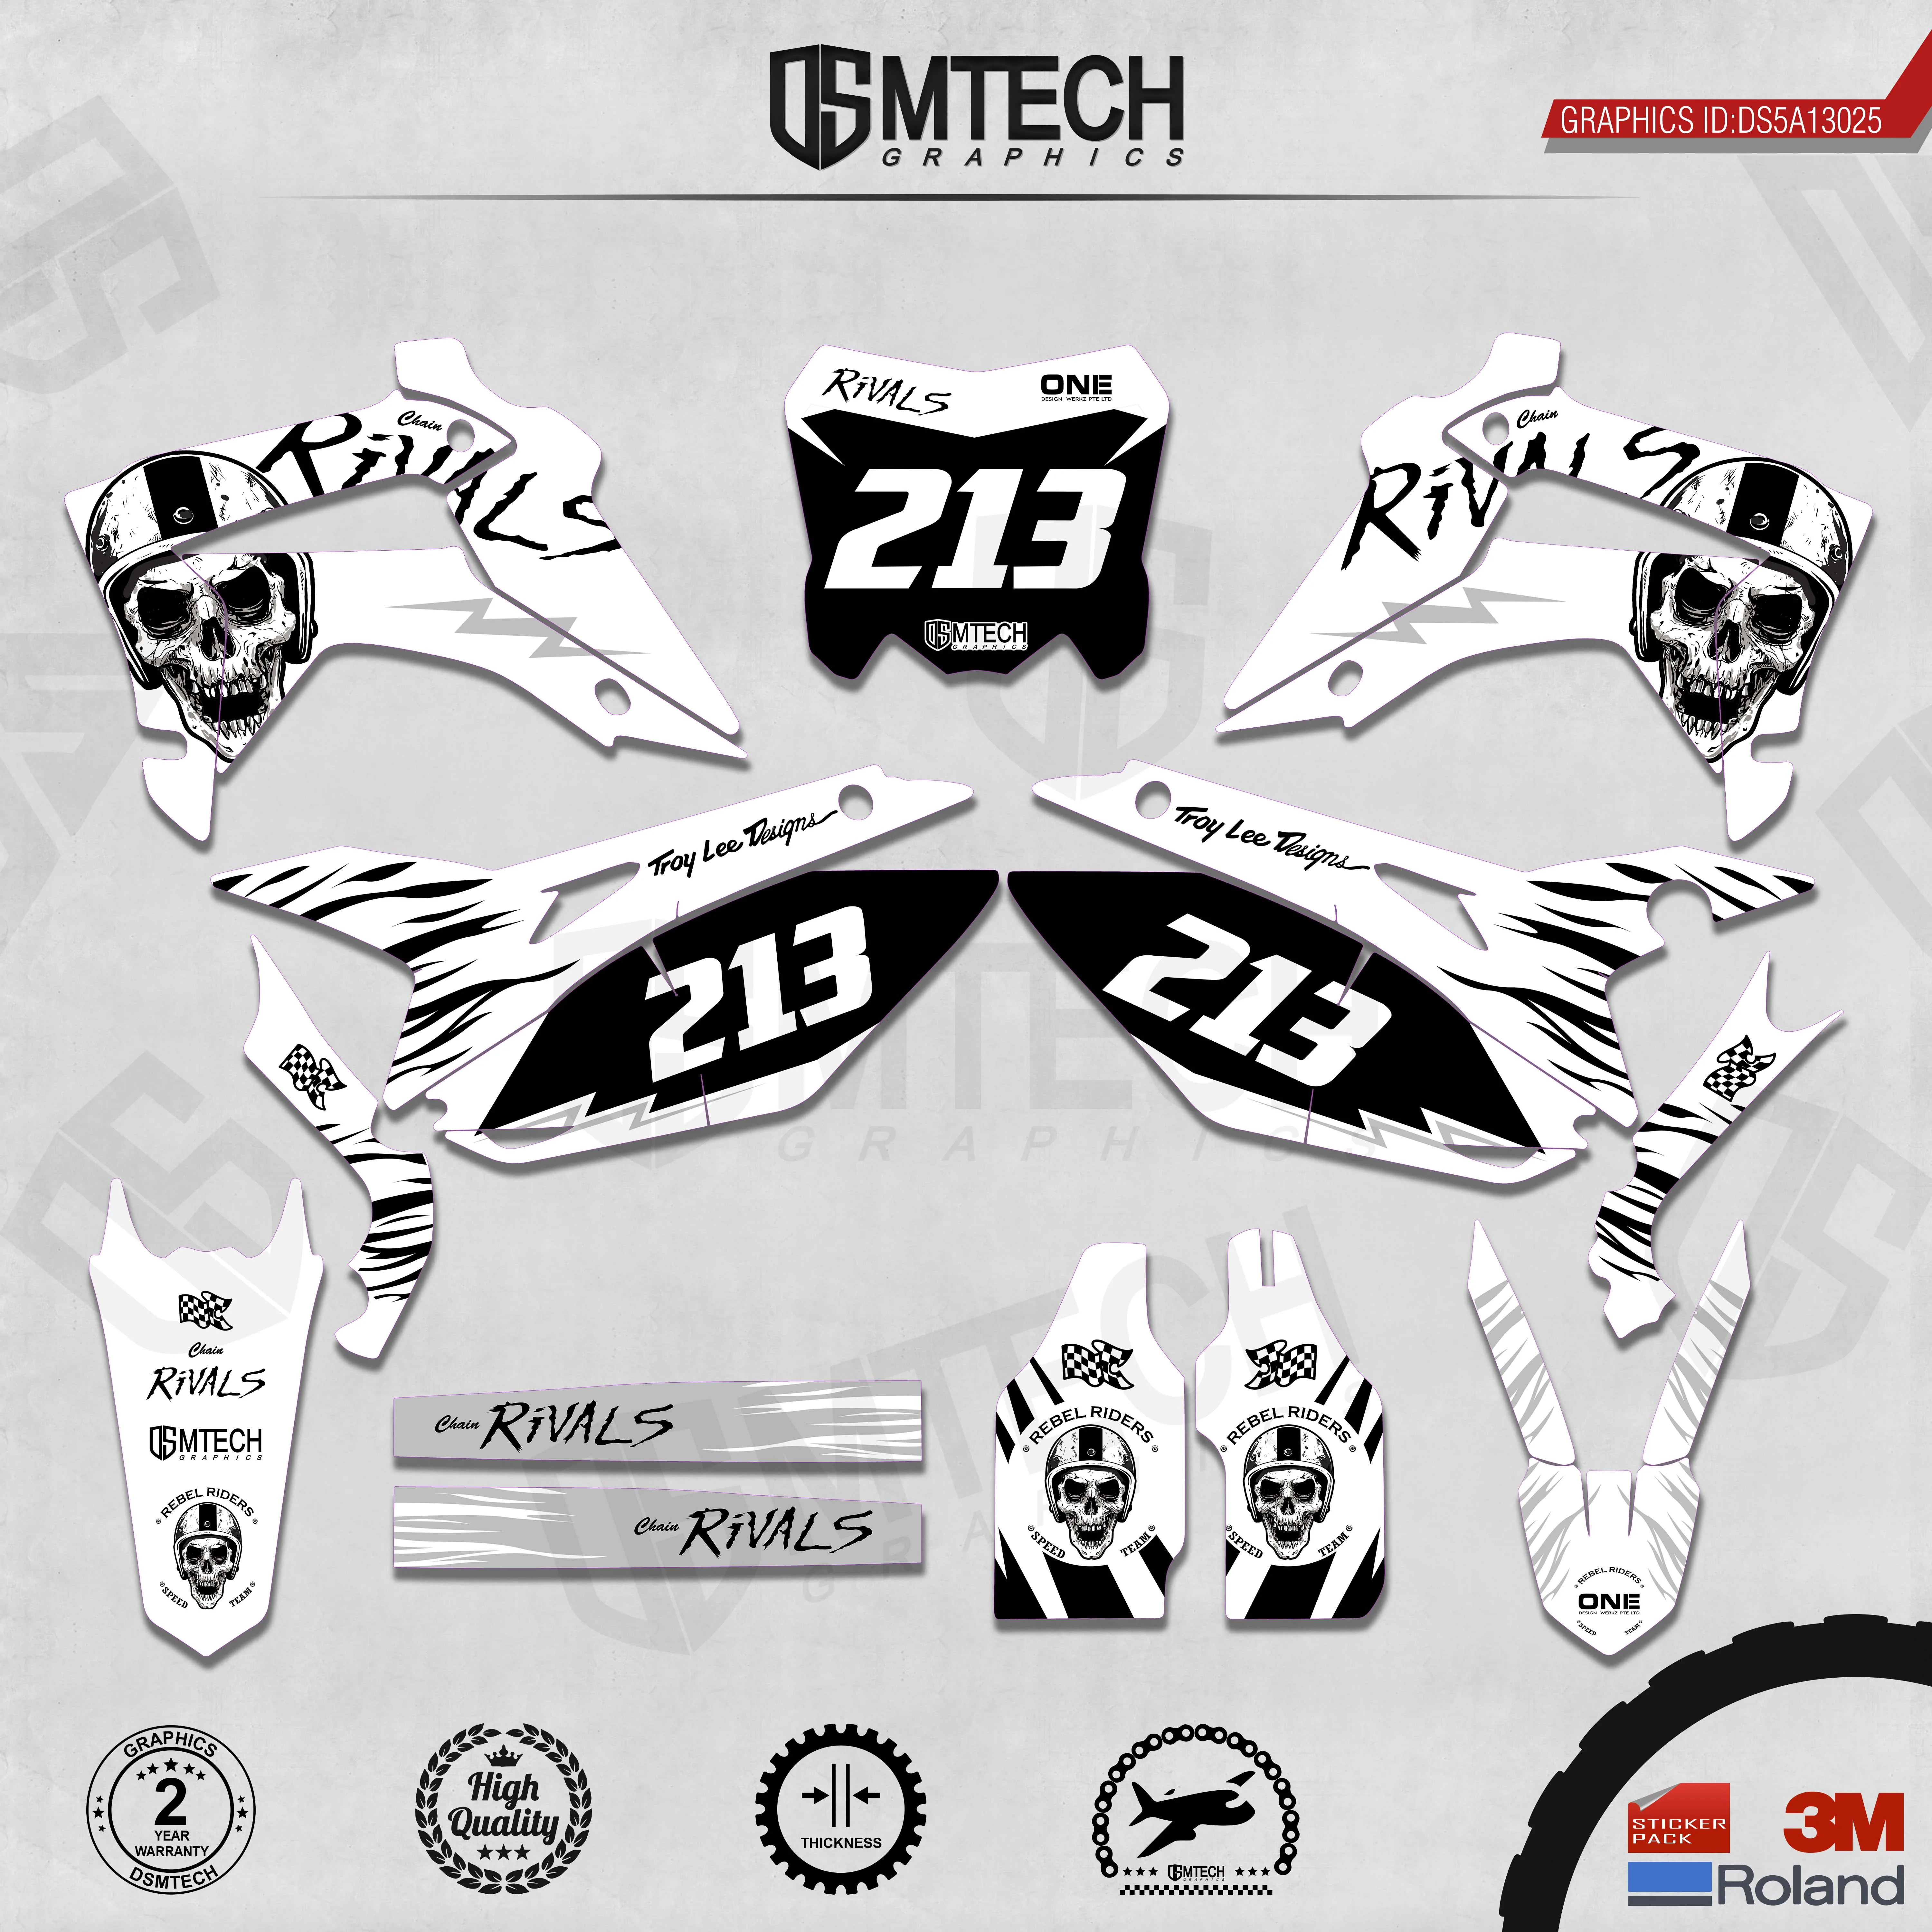 DSMTECH Customized Team Graphics Backgrounds Decals 3M Custom Stickers For 2014-2017CRF250R 2013-2016CRF450R 025